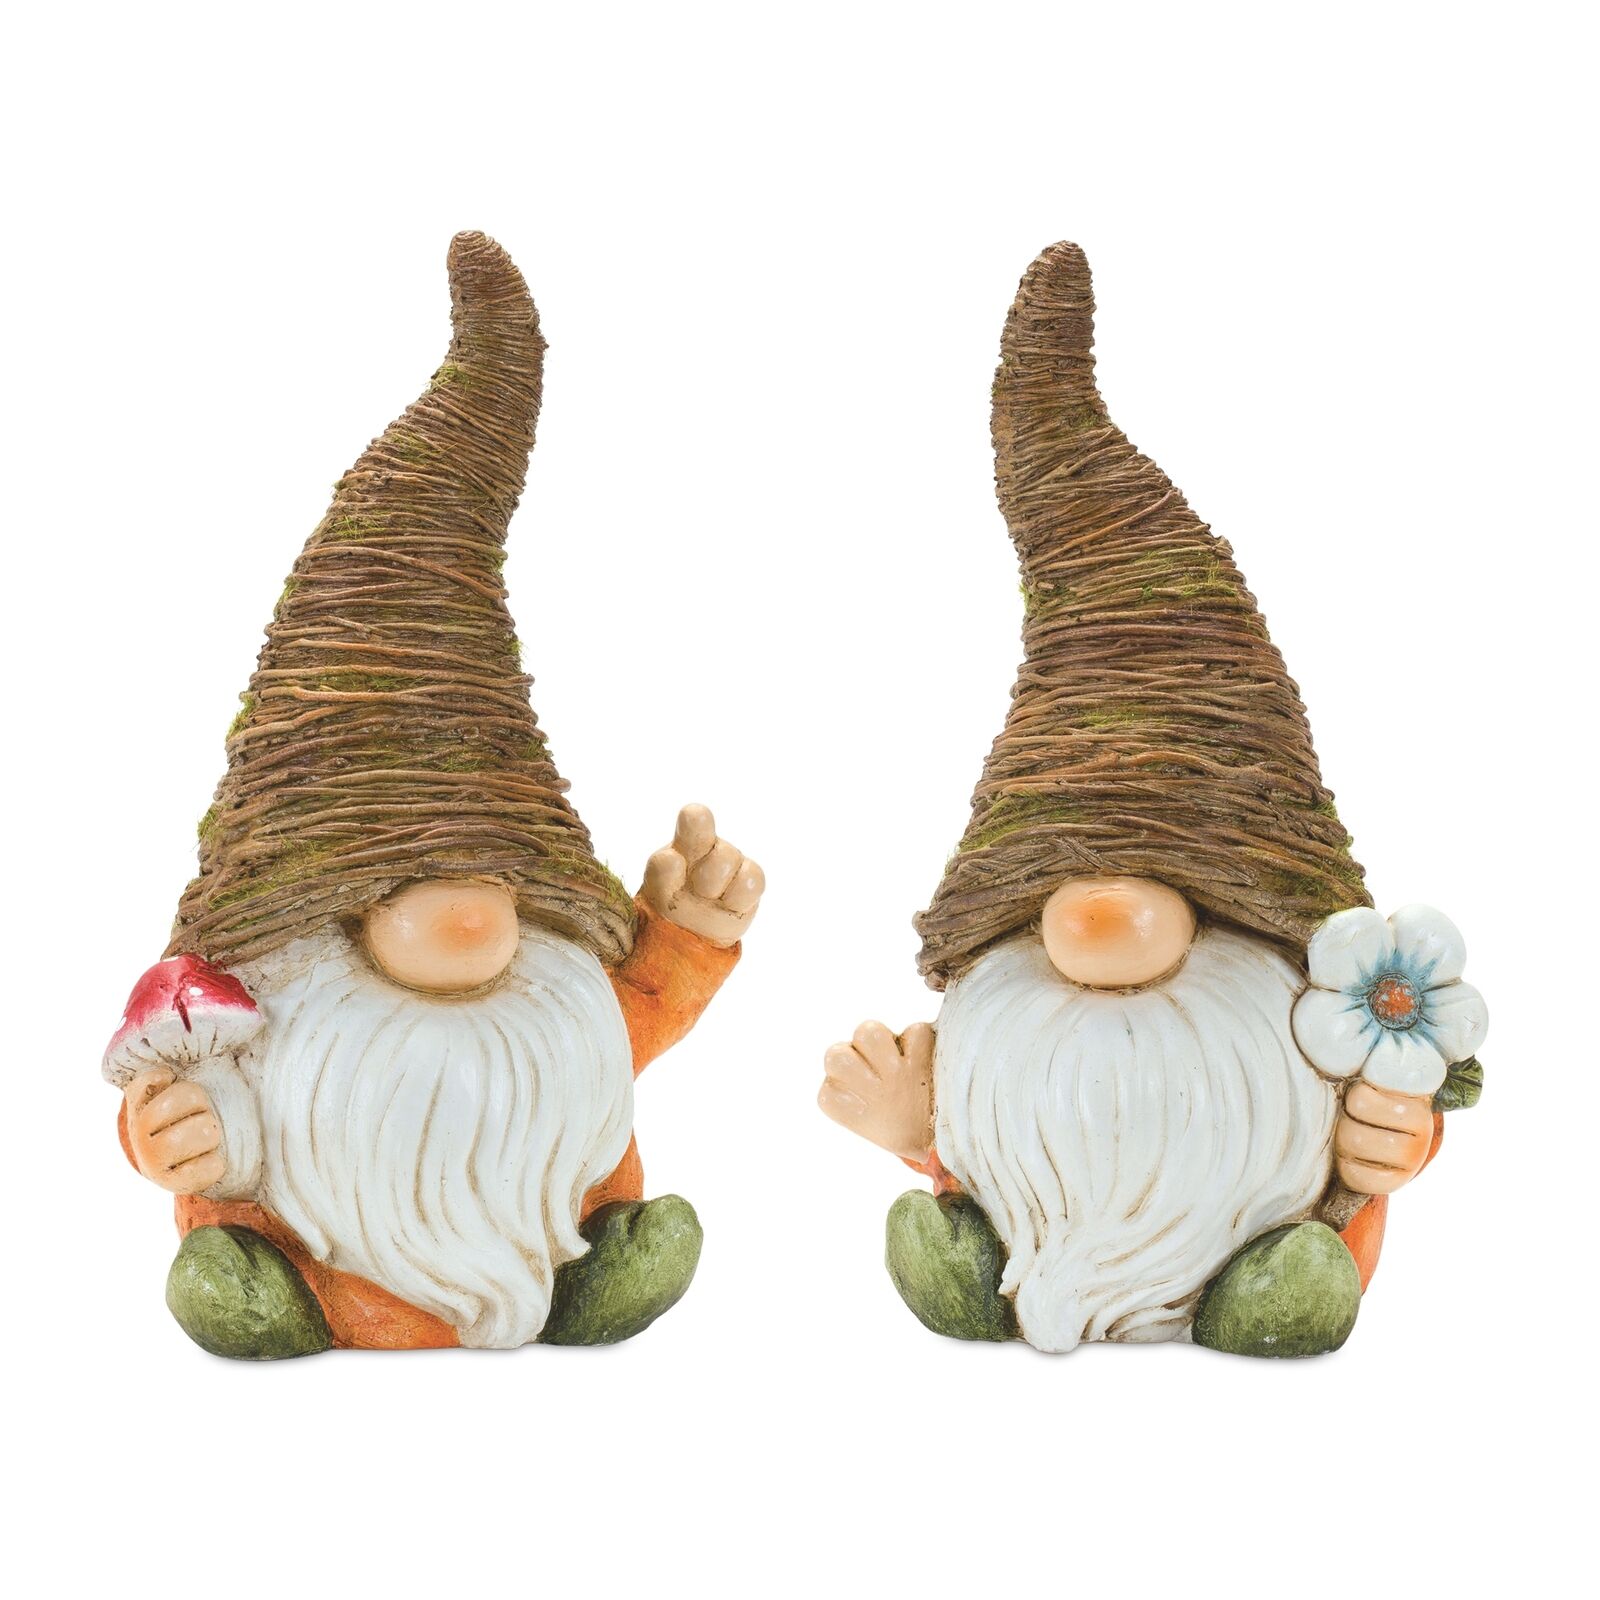 Melrose Distressed Garden Gnome Statue with Mushroom Flower Accent (Set of 2)